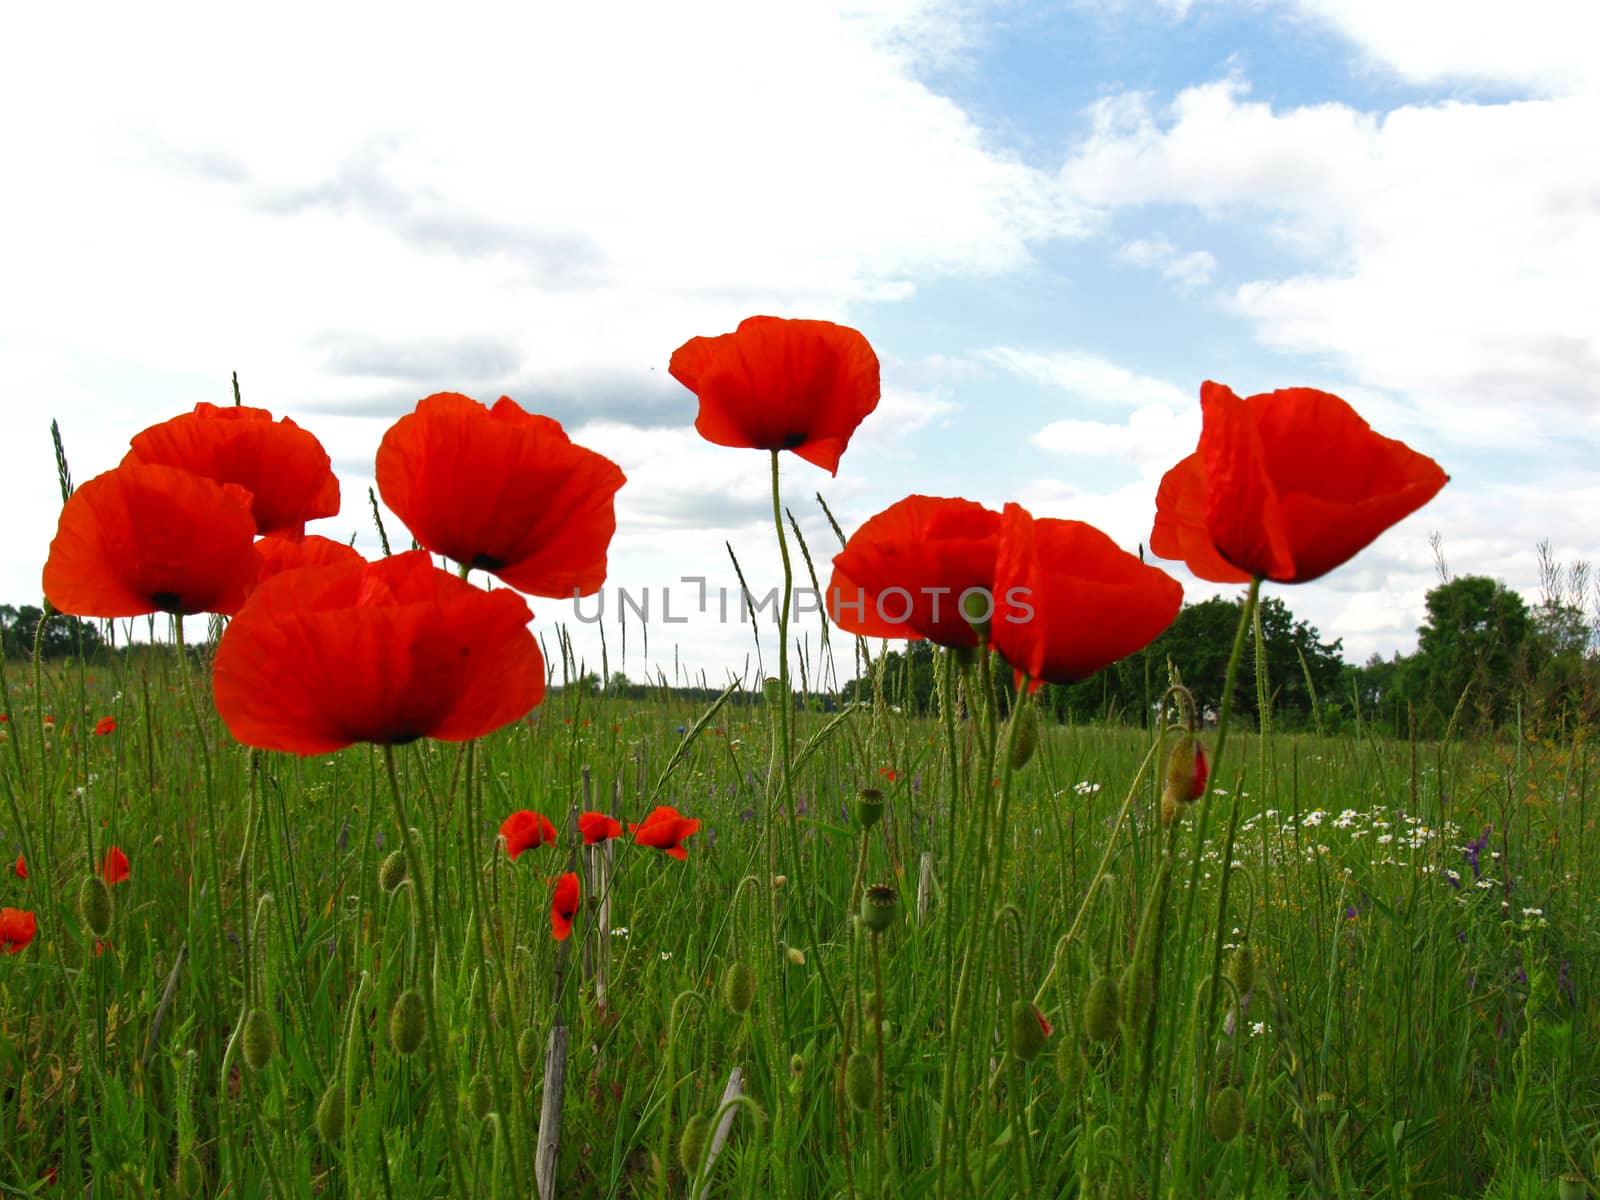 Field of red poppies by dred